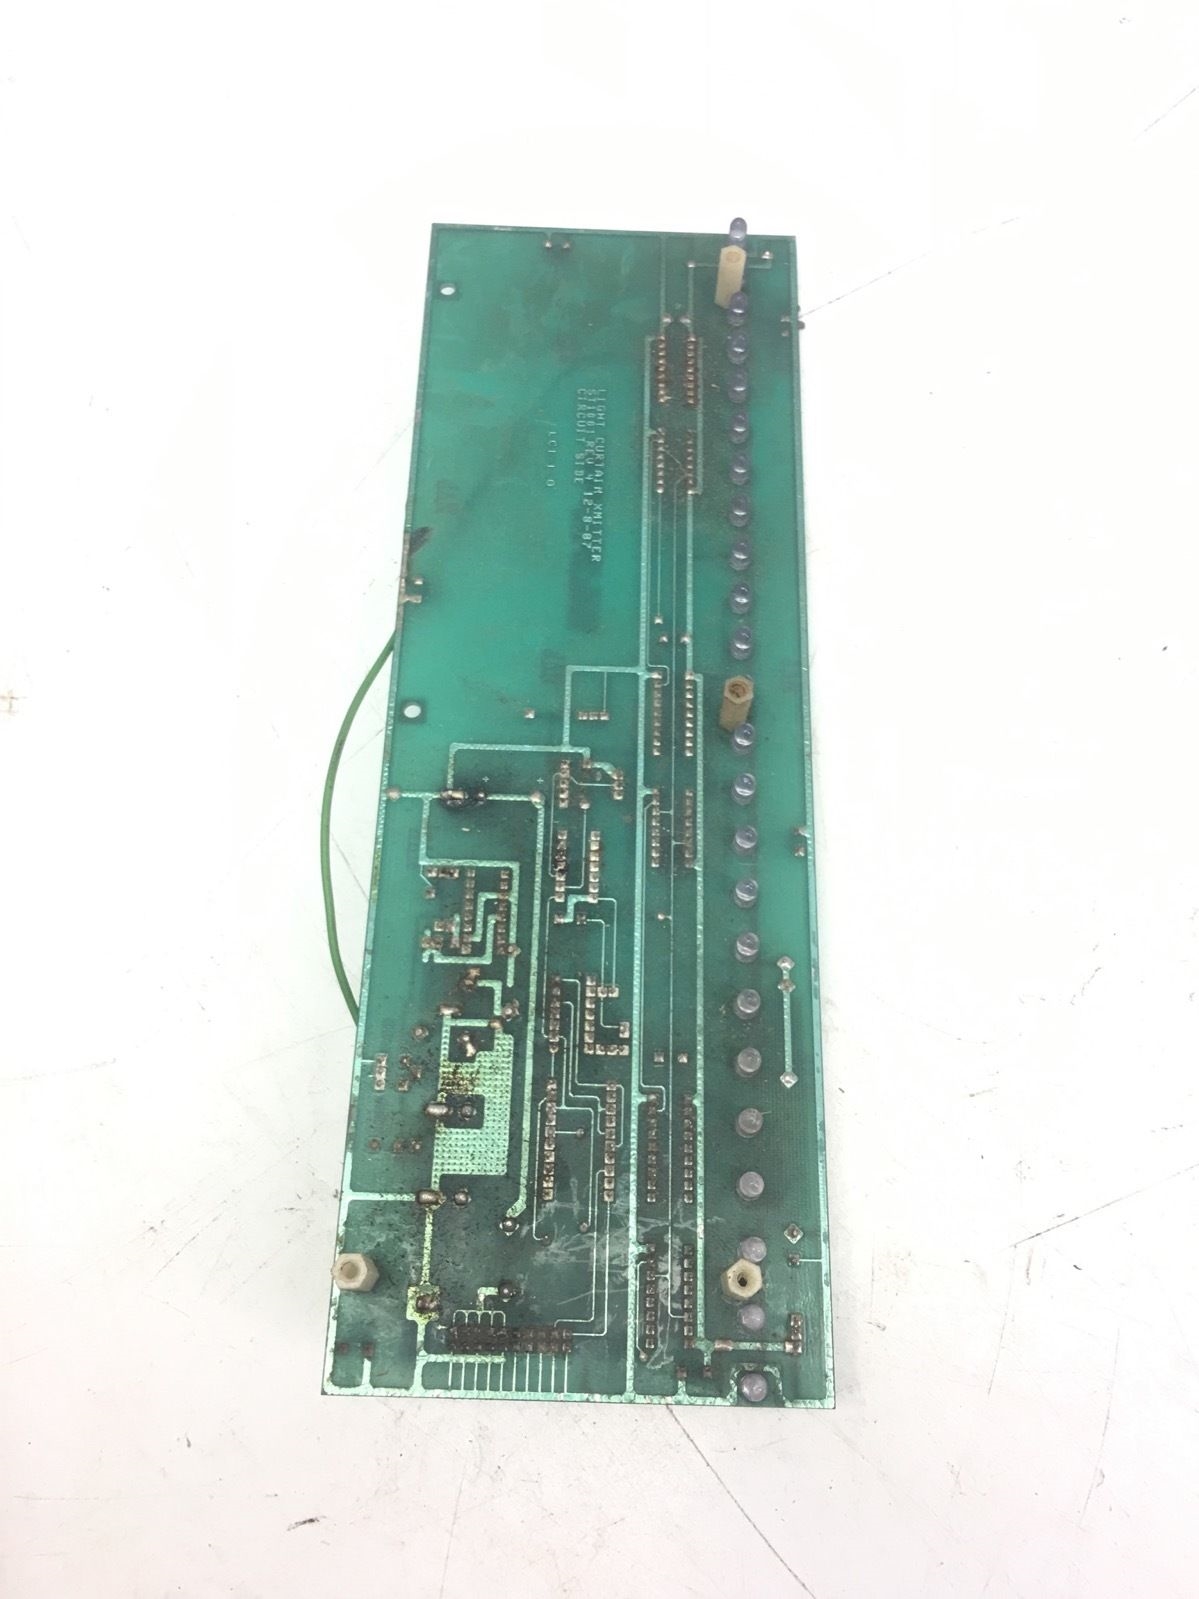 USED LIGHT CURTAIN XMITTER CIRCUIT CARD, ST1001 REVISION 4, FAST SHIP, B273 2